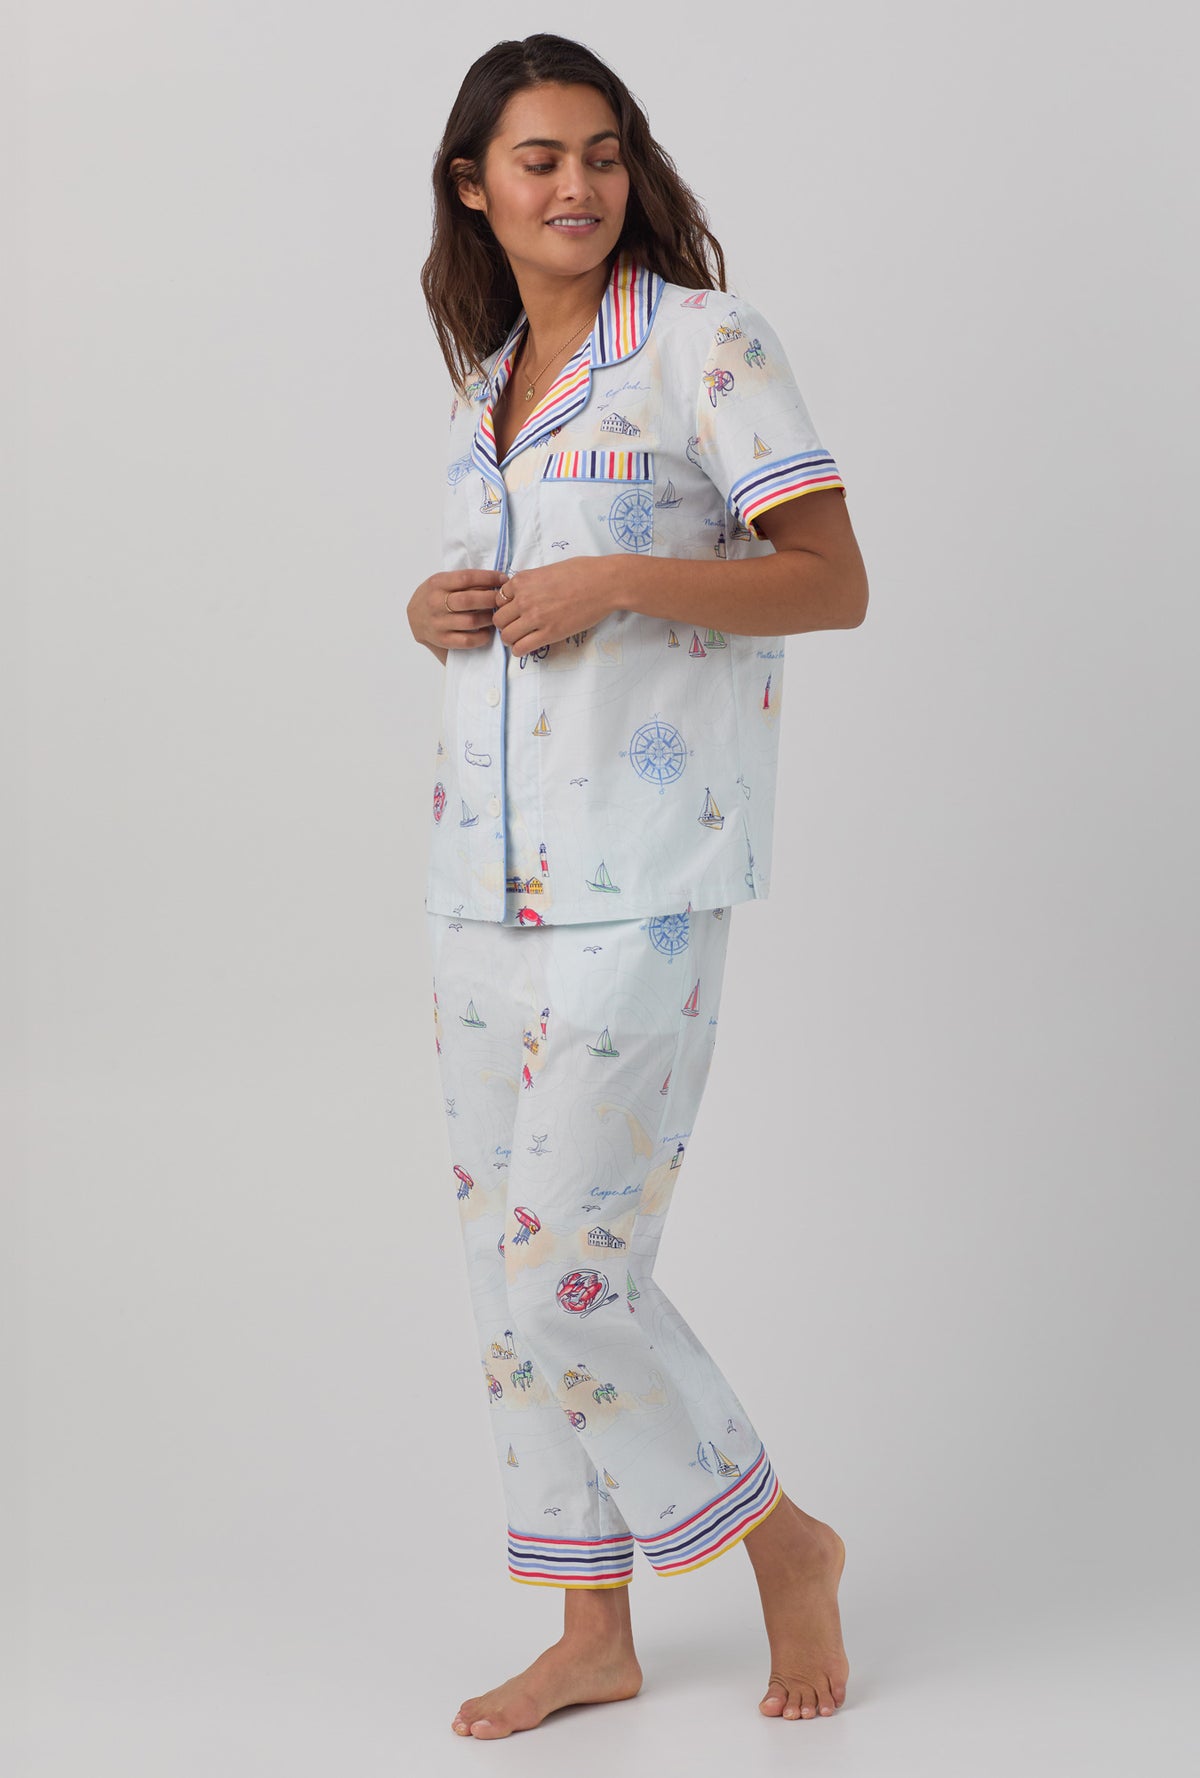 A lady wearing white short sleeve Classic Woven Cotton Poplin Cropped PJ Set with Eastern Seaboard print.